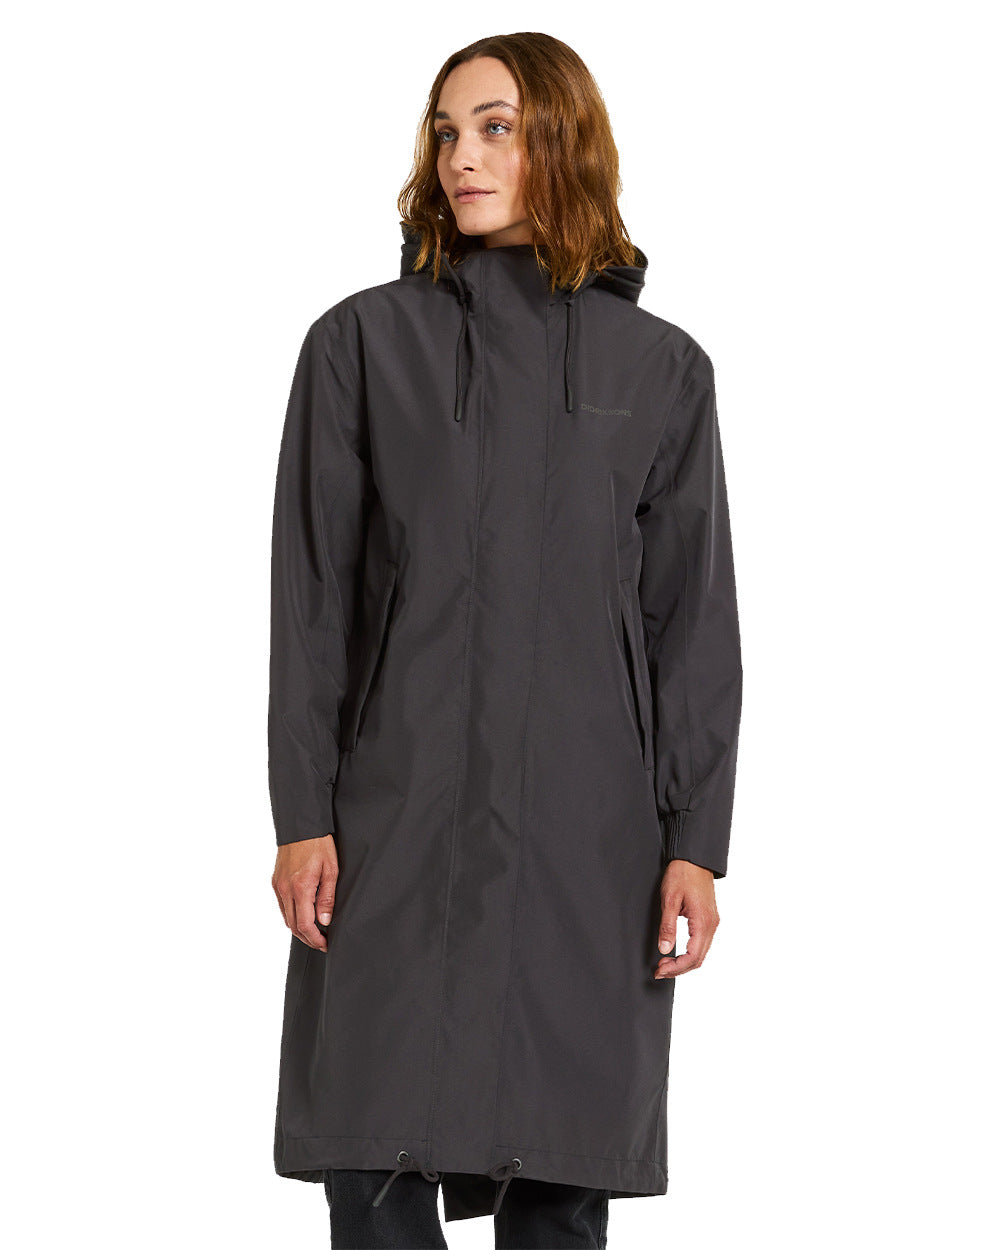 Black Coloured Didriksons Alice Womens Parka Long 2 On A White Background 